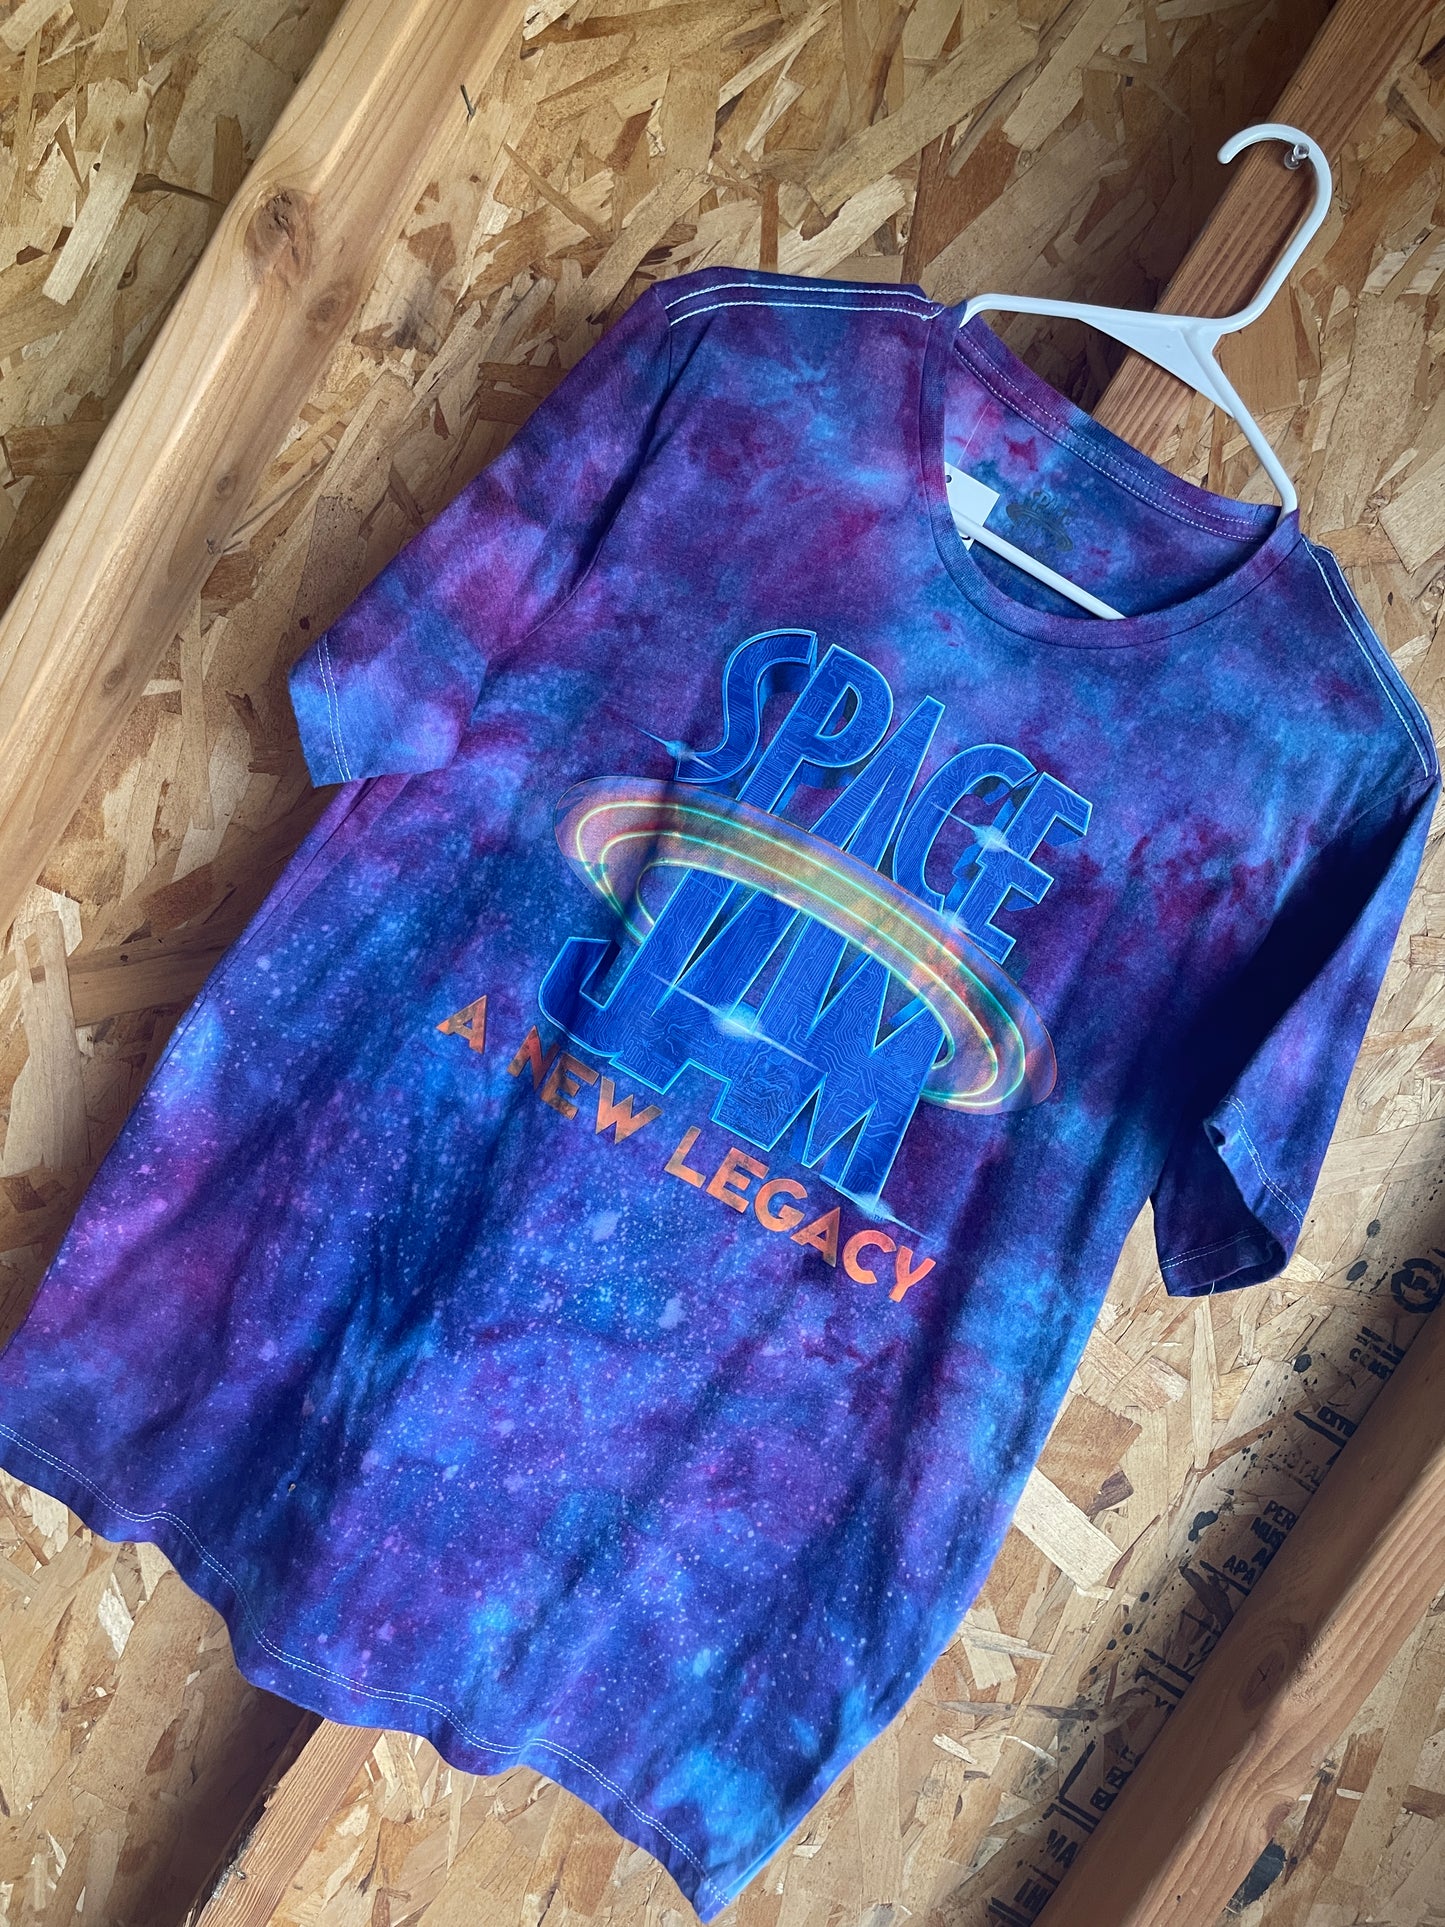 Large Men’s Space Jam A New Legacy Handmade Tie Dye T-Shirt | Blue and purple Crumpled Tie Dye Short Sleeve